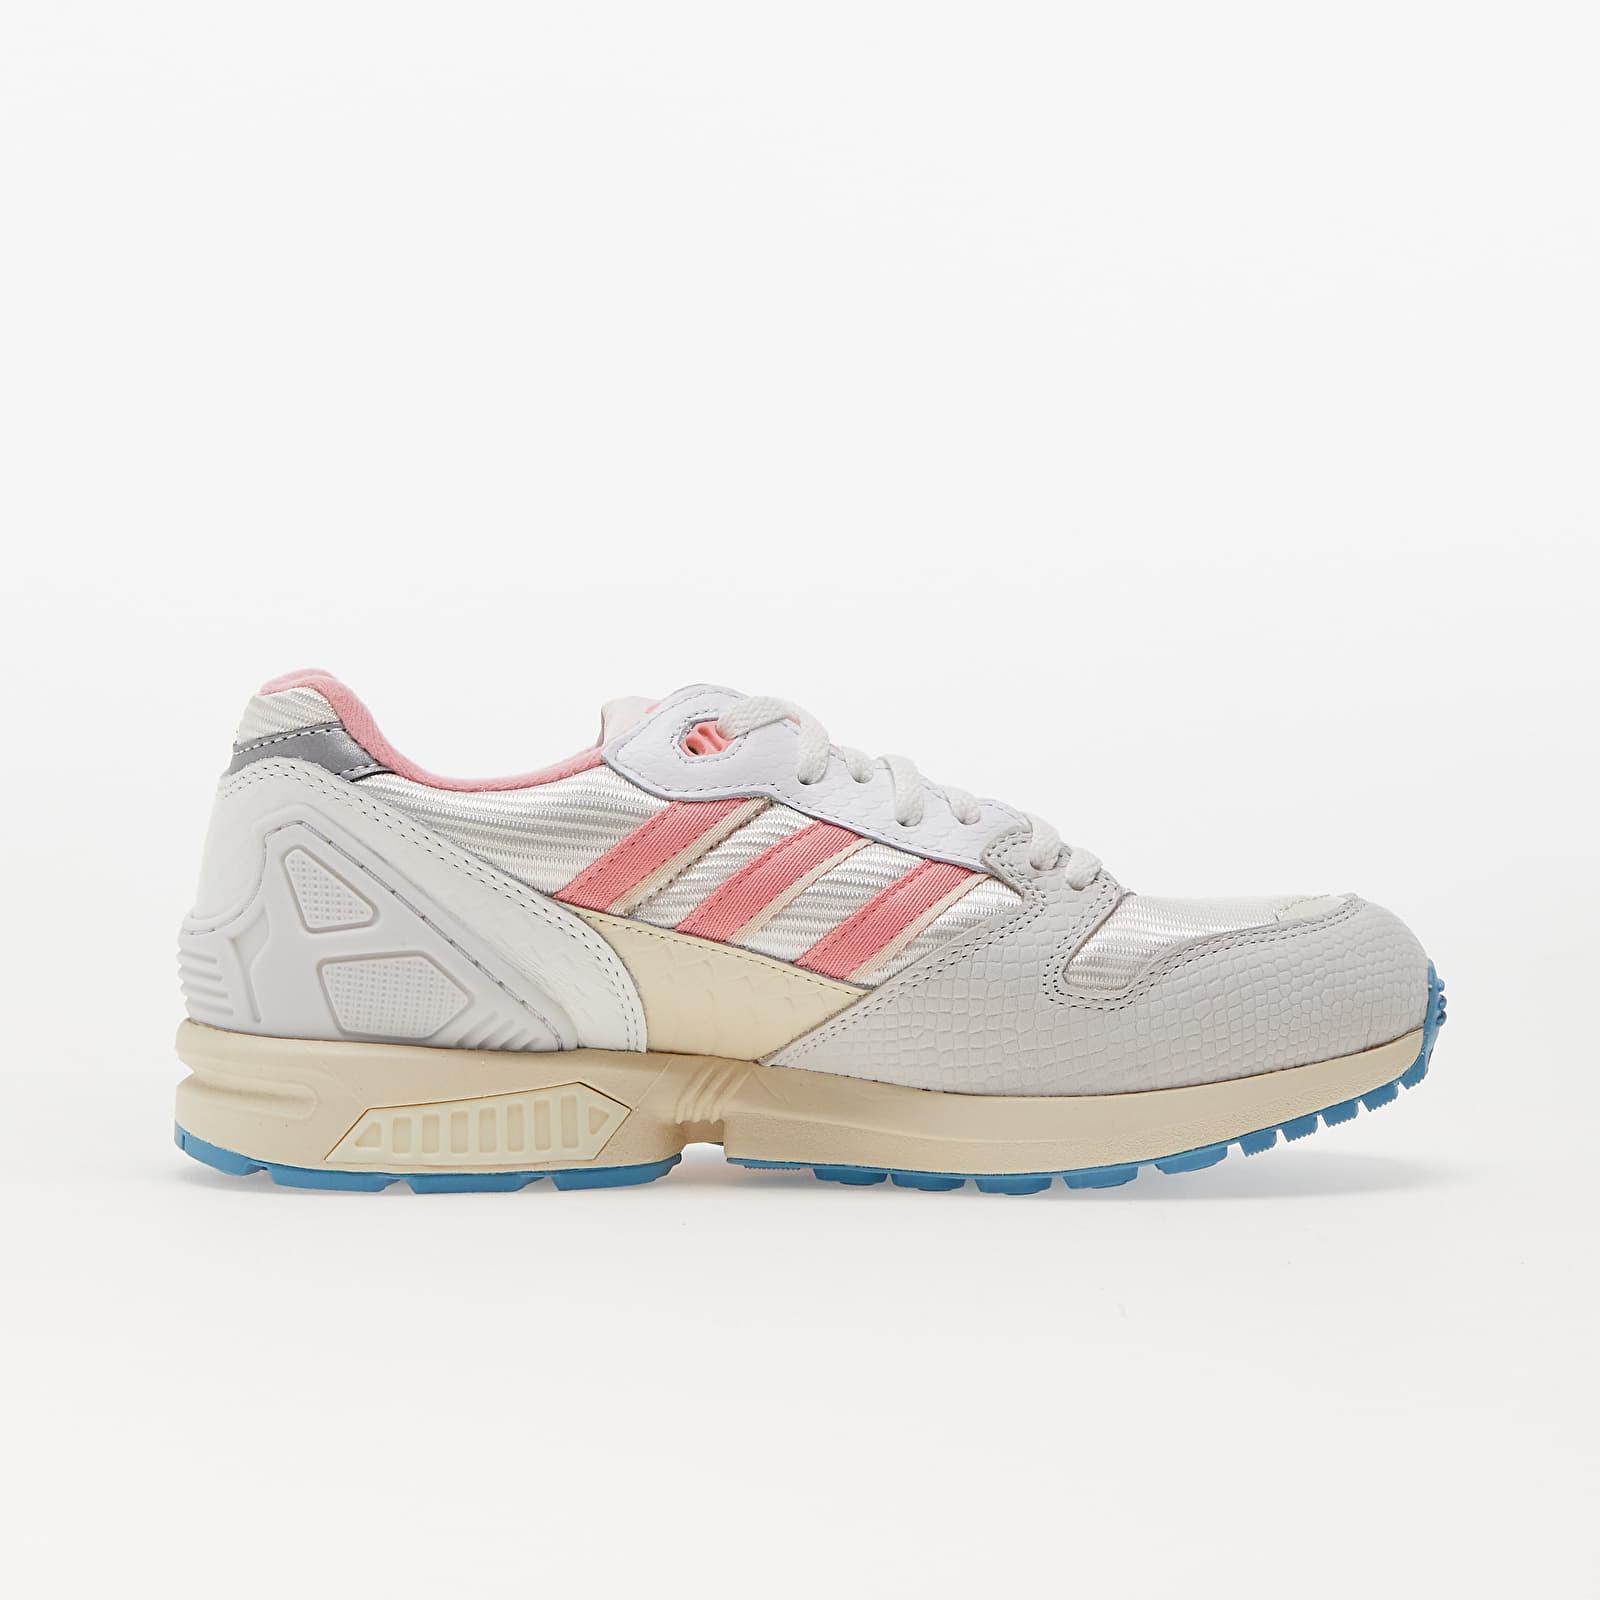 adidas Originals Adidas Zx 5020 W Cloud White/ Core White/ Tactile Steel |  Lyst